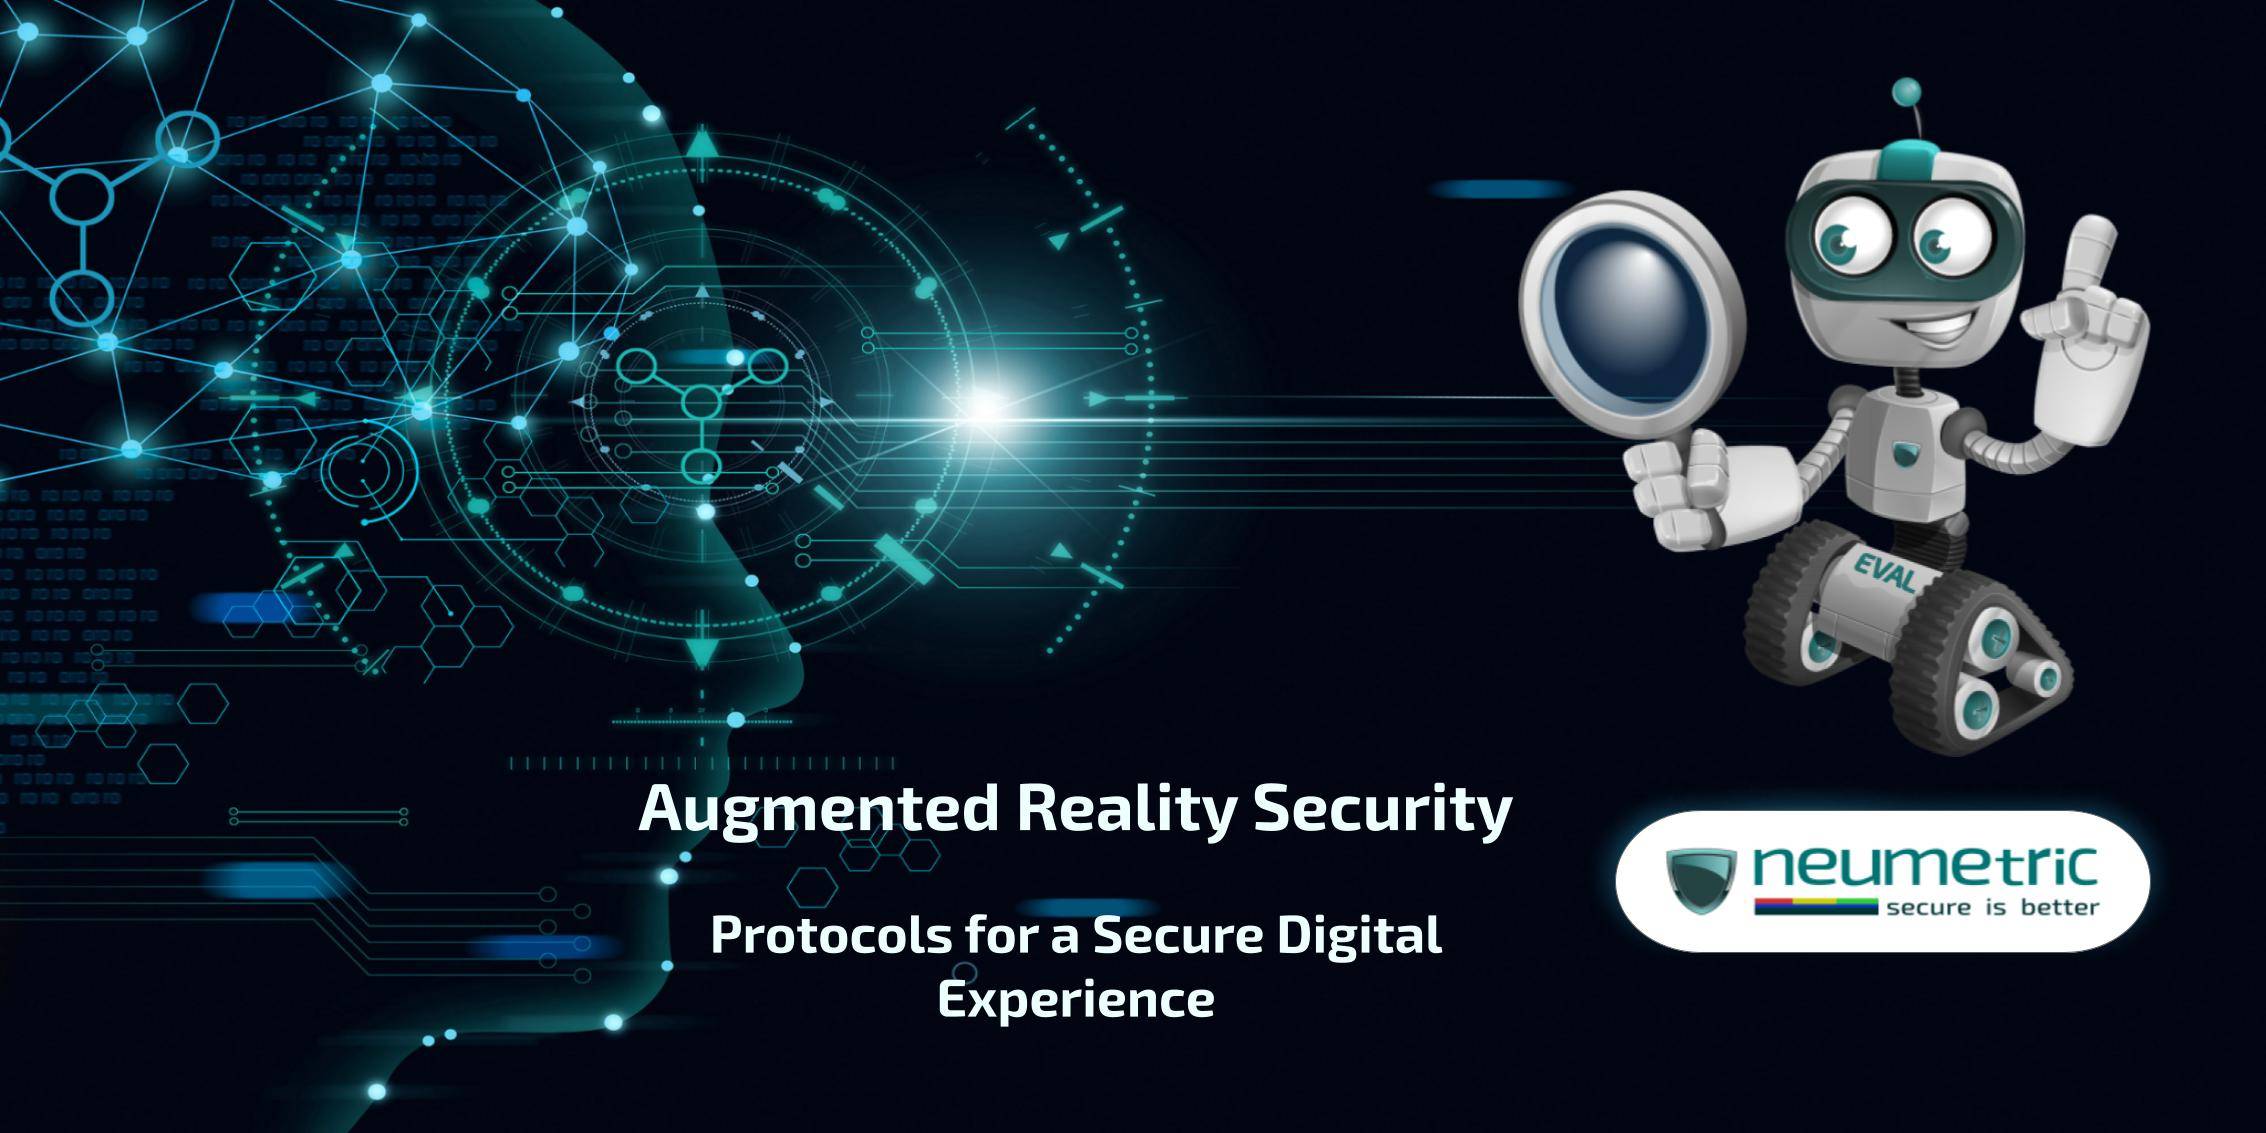 Augmented Reality Security: Protocols for a Secure Digital Experience